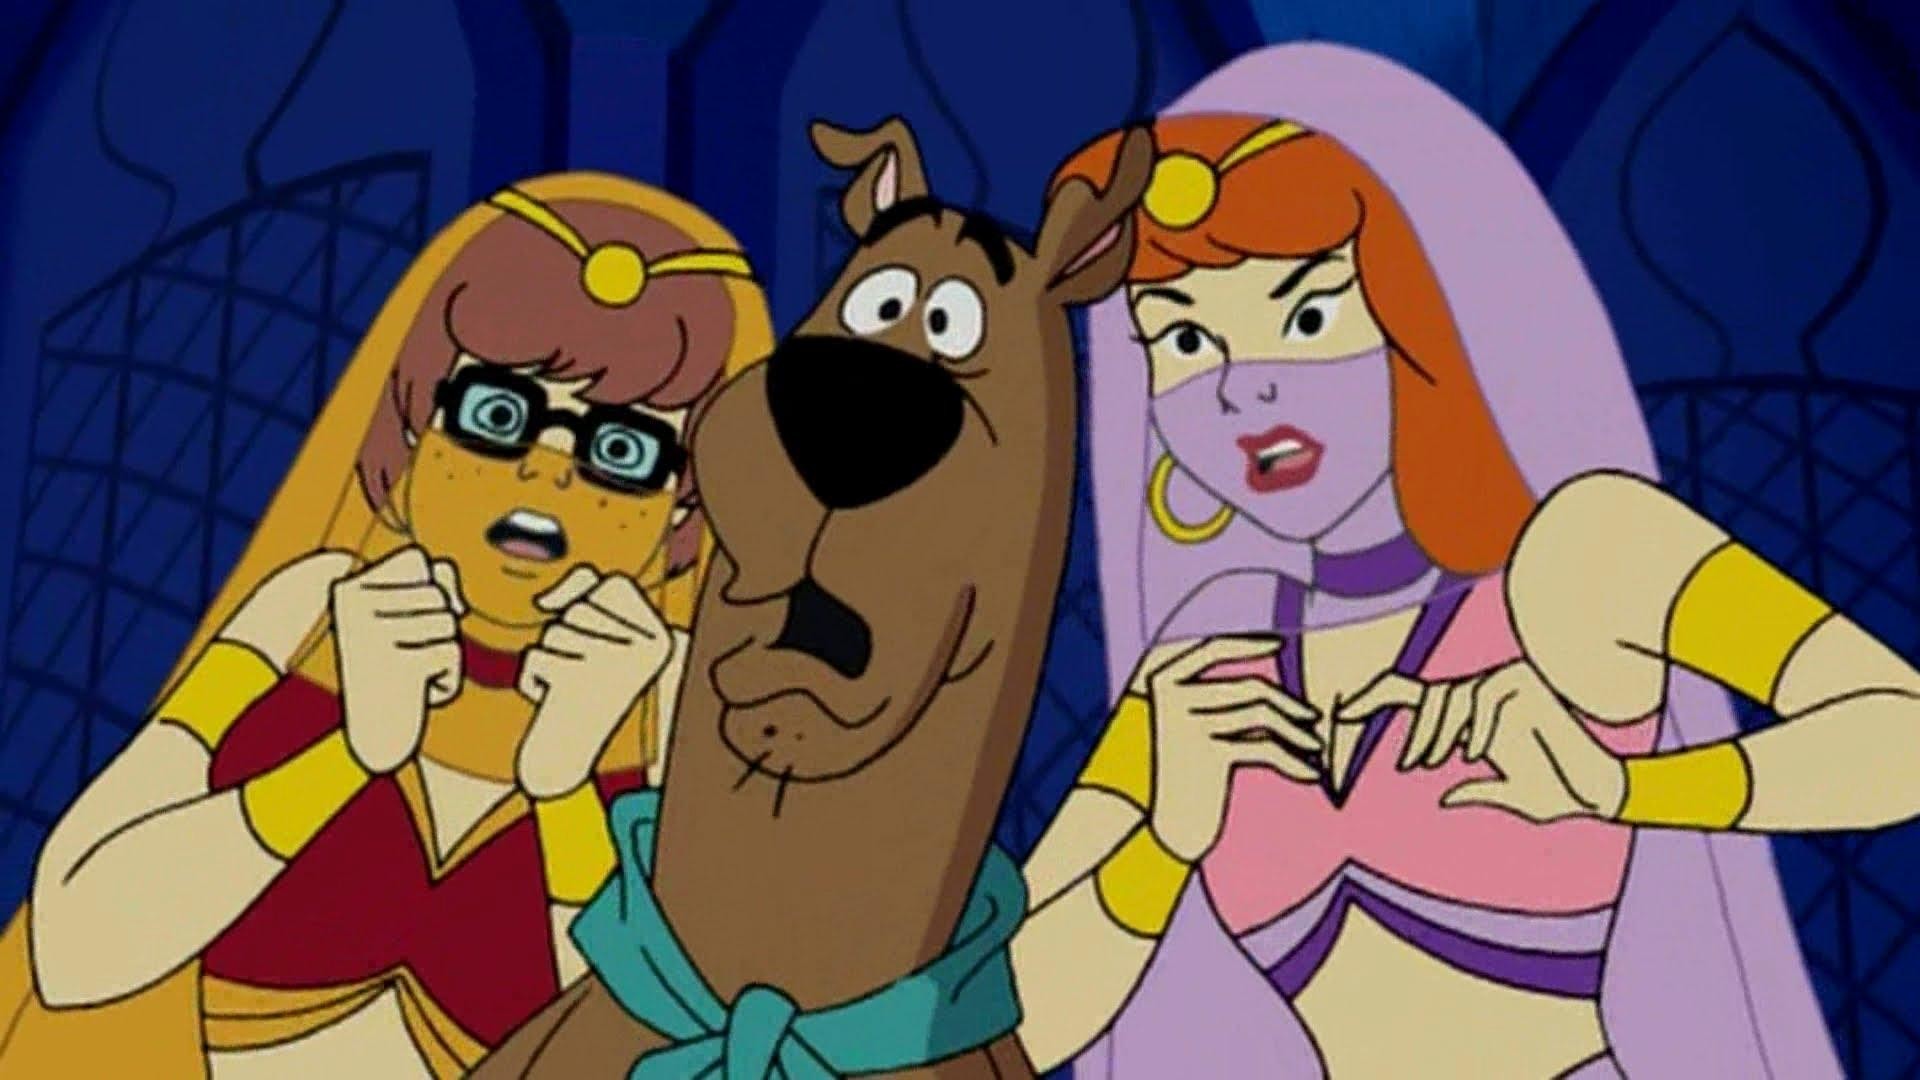 1920x1080 wallpaper.wiki-HD-Scooby-Doo-Images-PIC-WPD00999